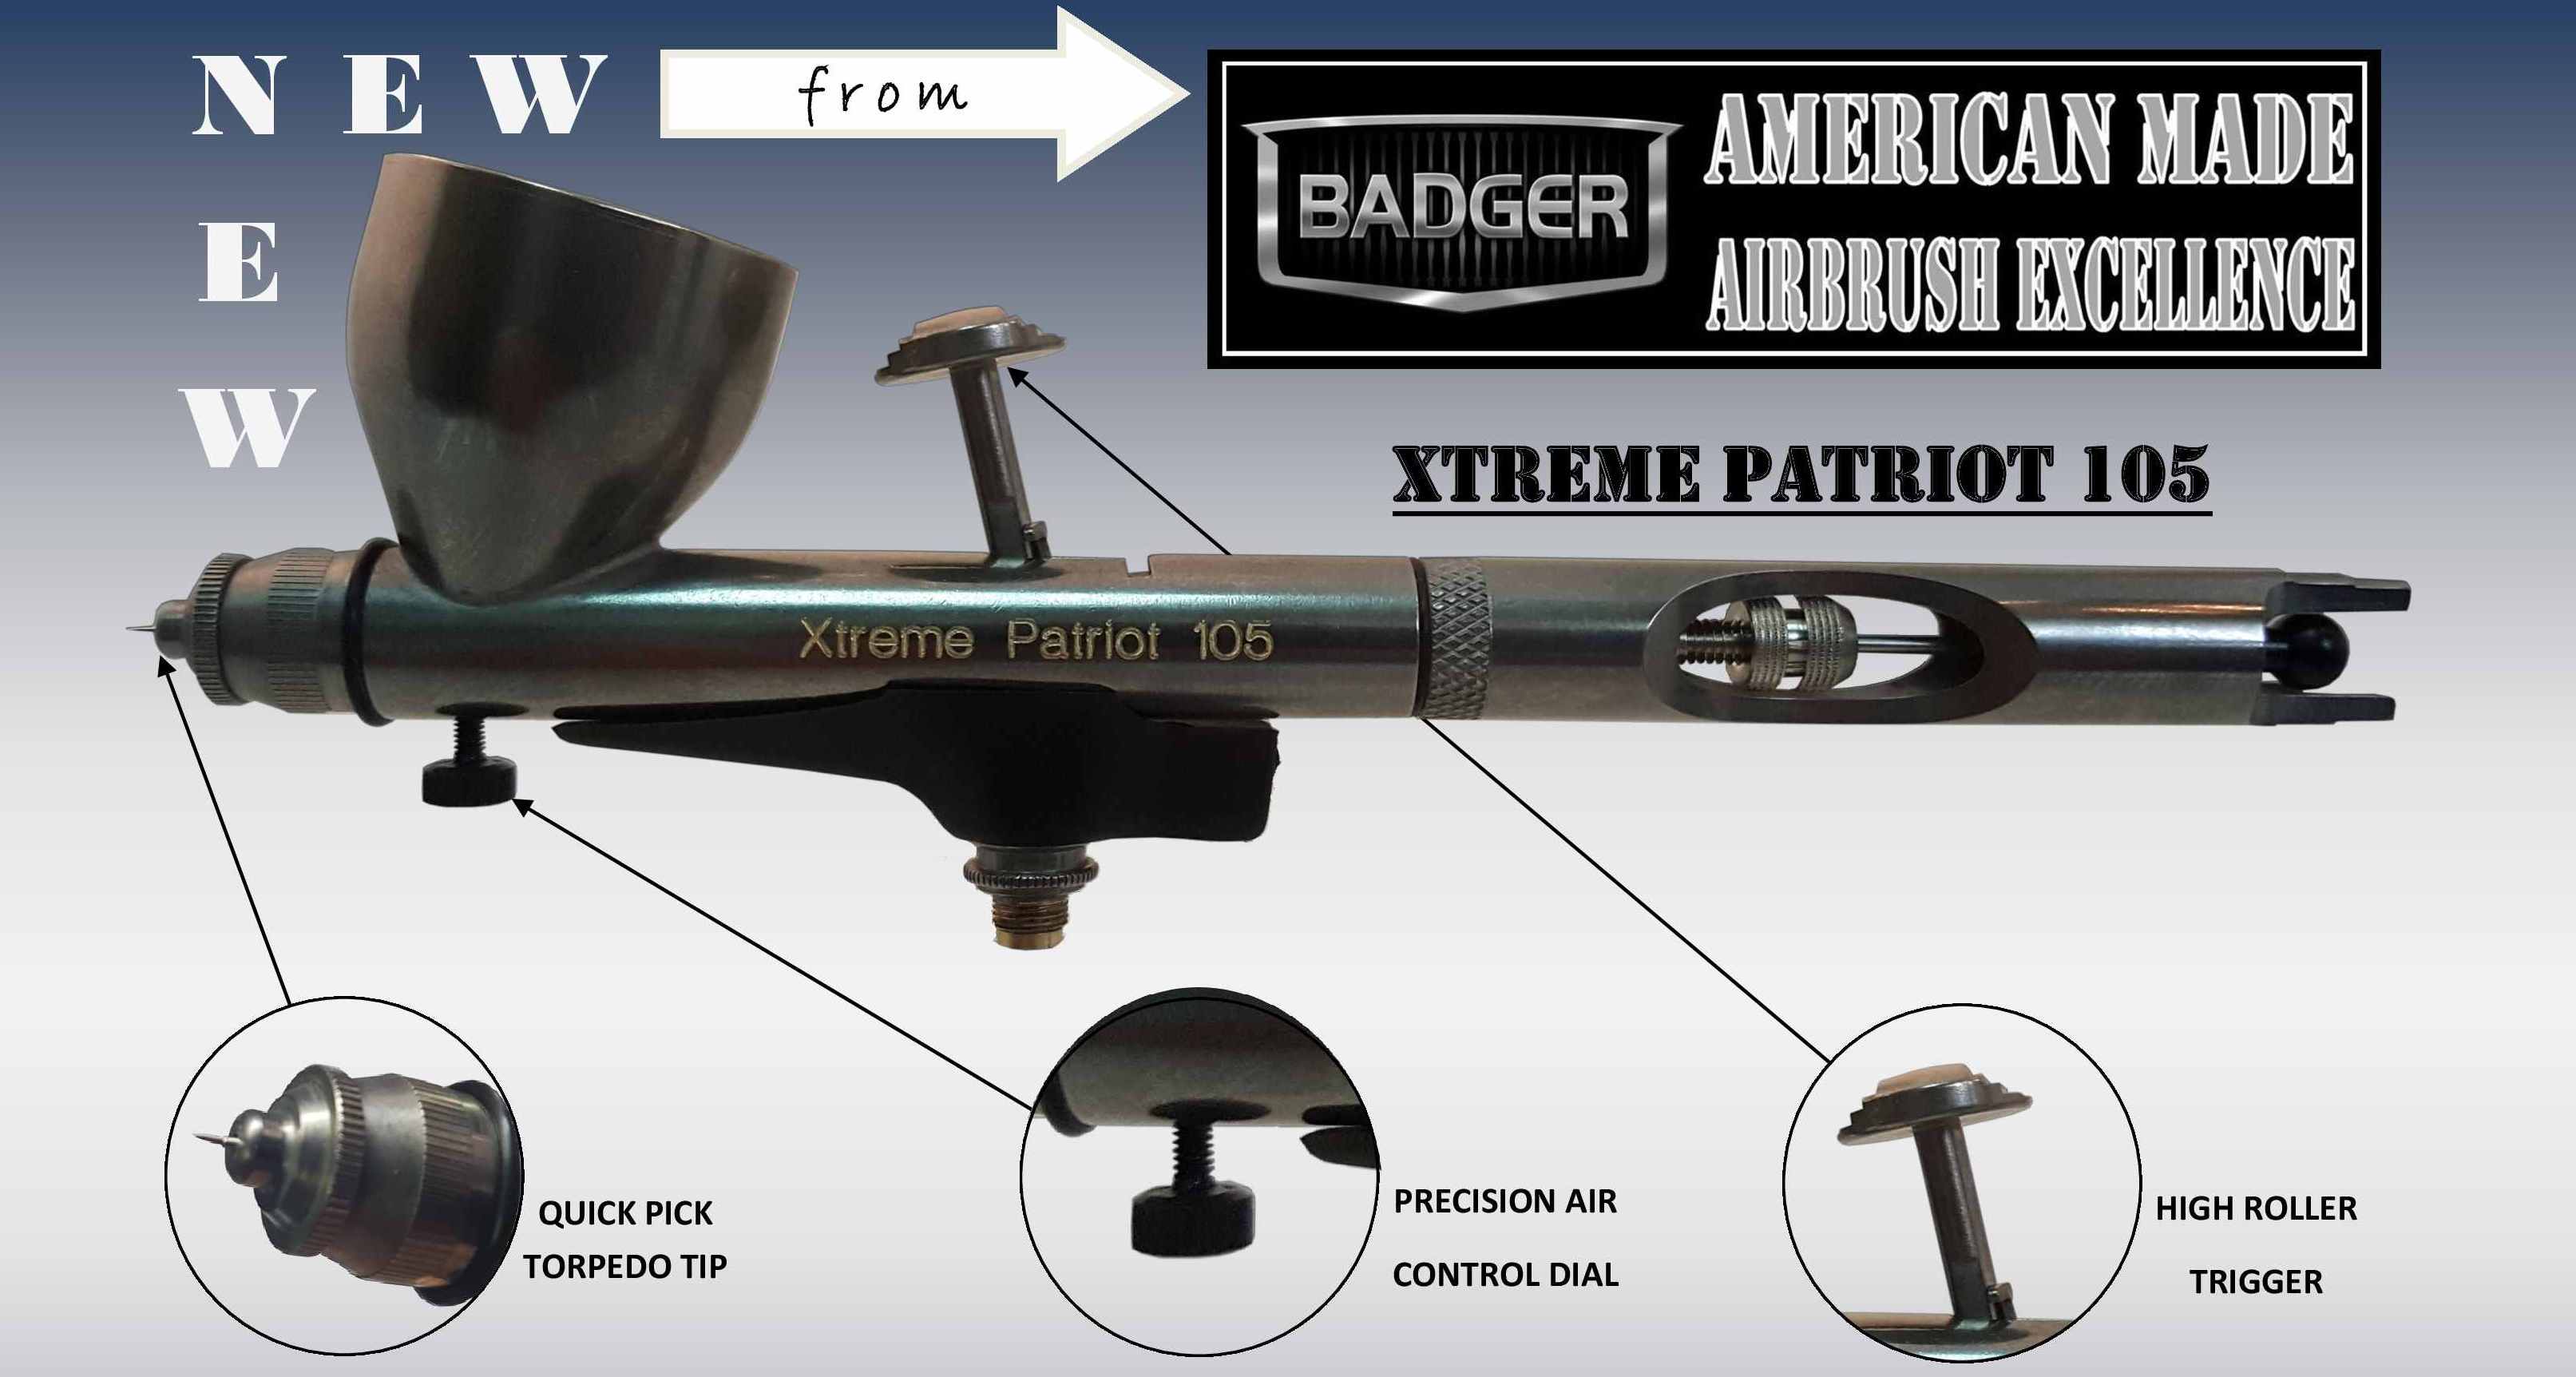 NEW BADGER XTREME PATRIOT 105 AIRBRUSH PAC DIAL HIGH ROLLER TRIGGER 105-XTR HOSE 